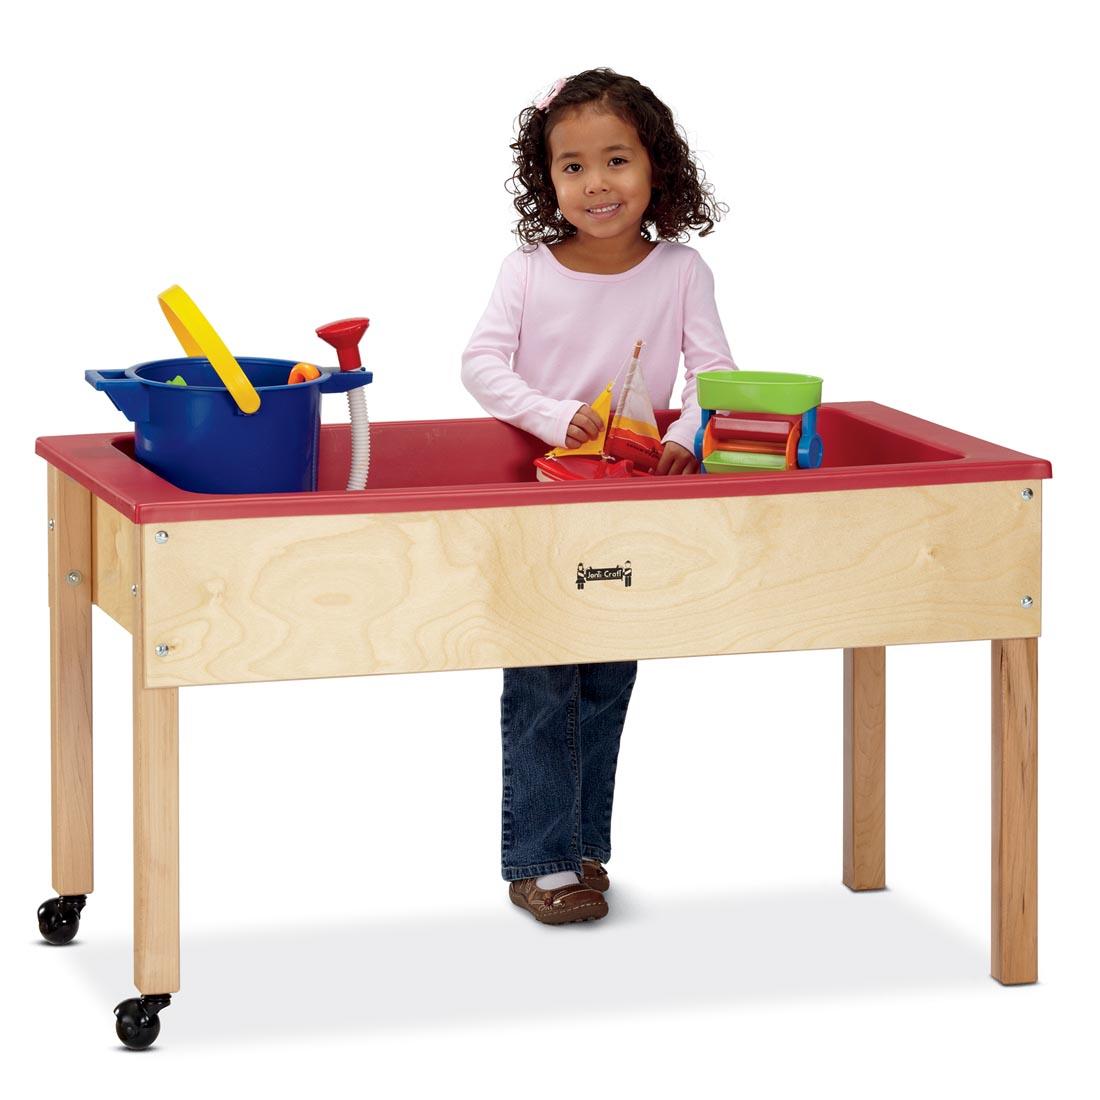 Child standing at a Sensory Table playing with a boat